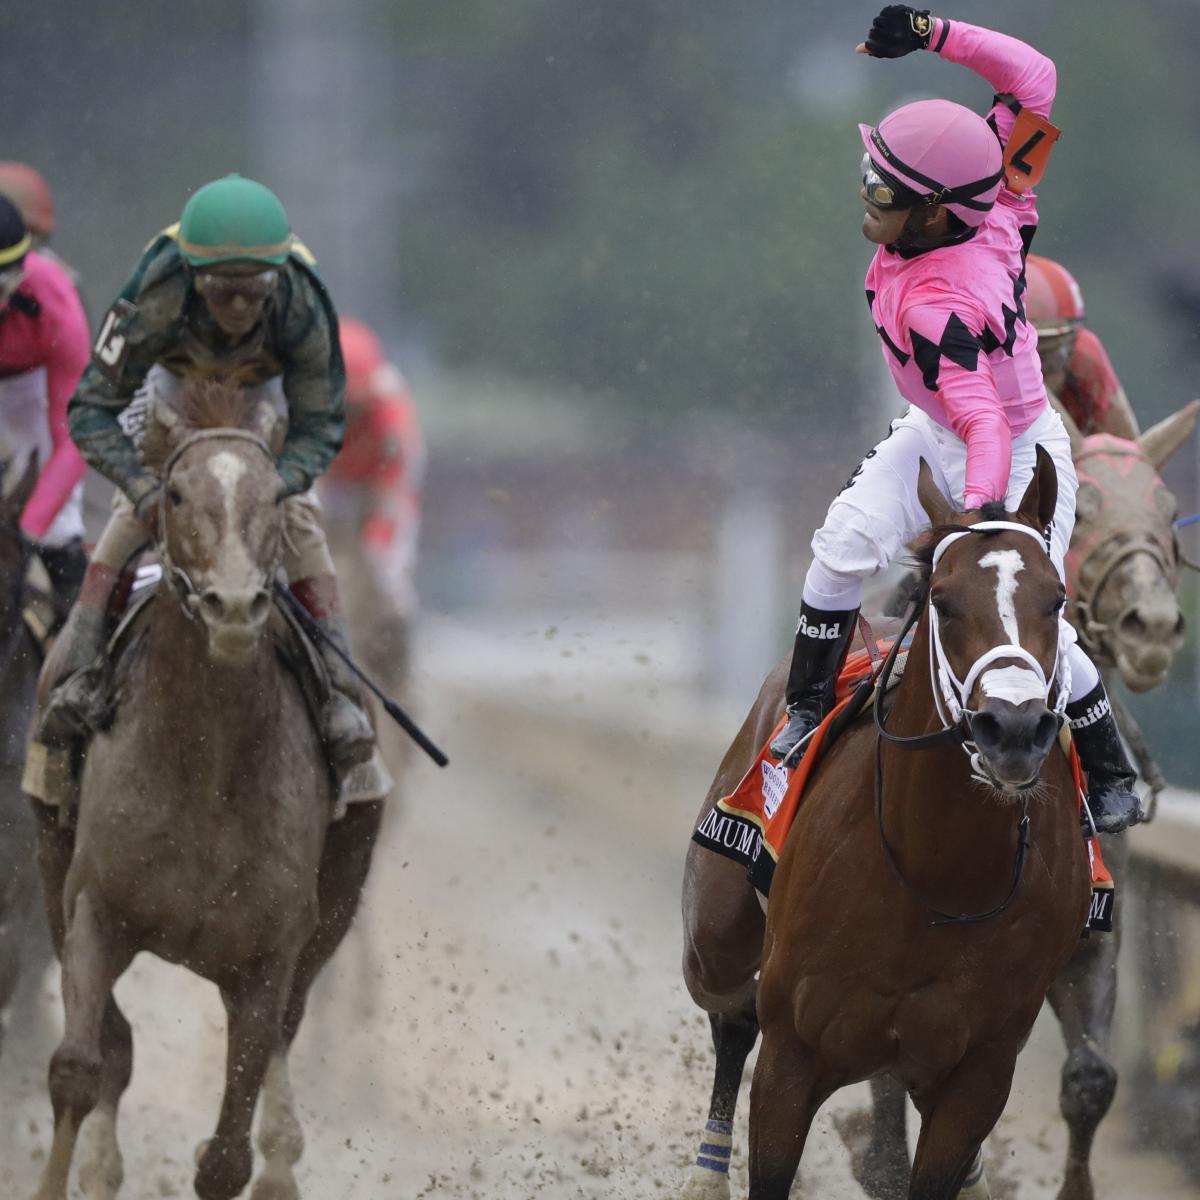 Kentucky Derby 2019 Video Highlights, Payouts and Churchill Downs